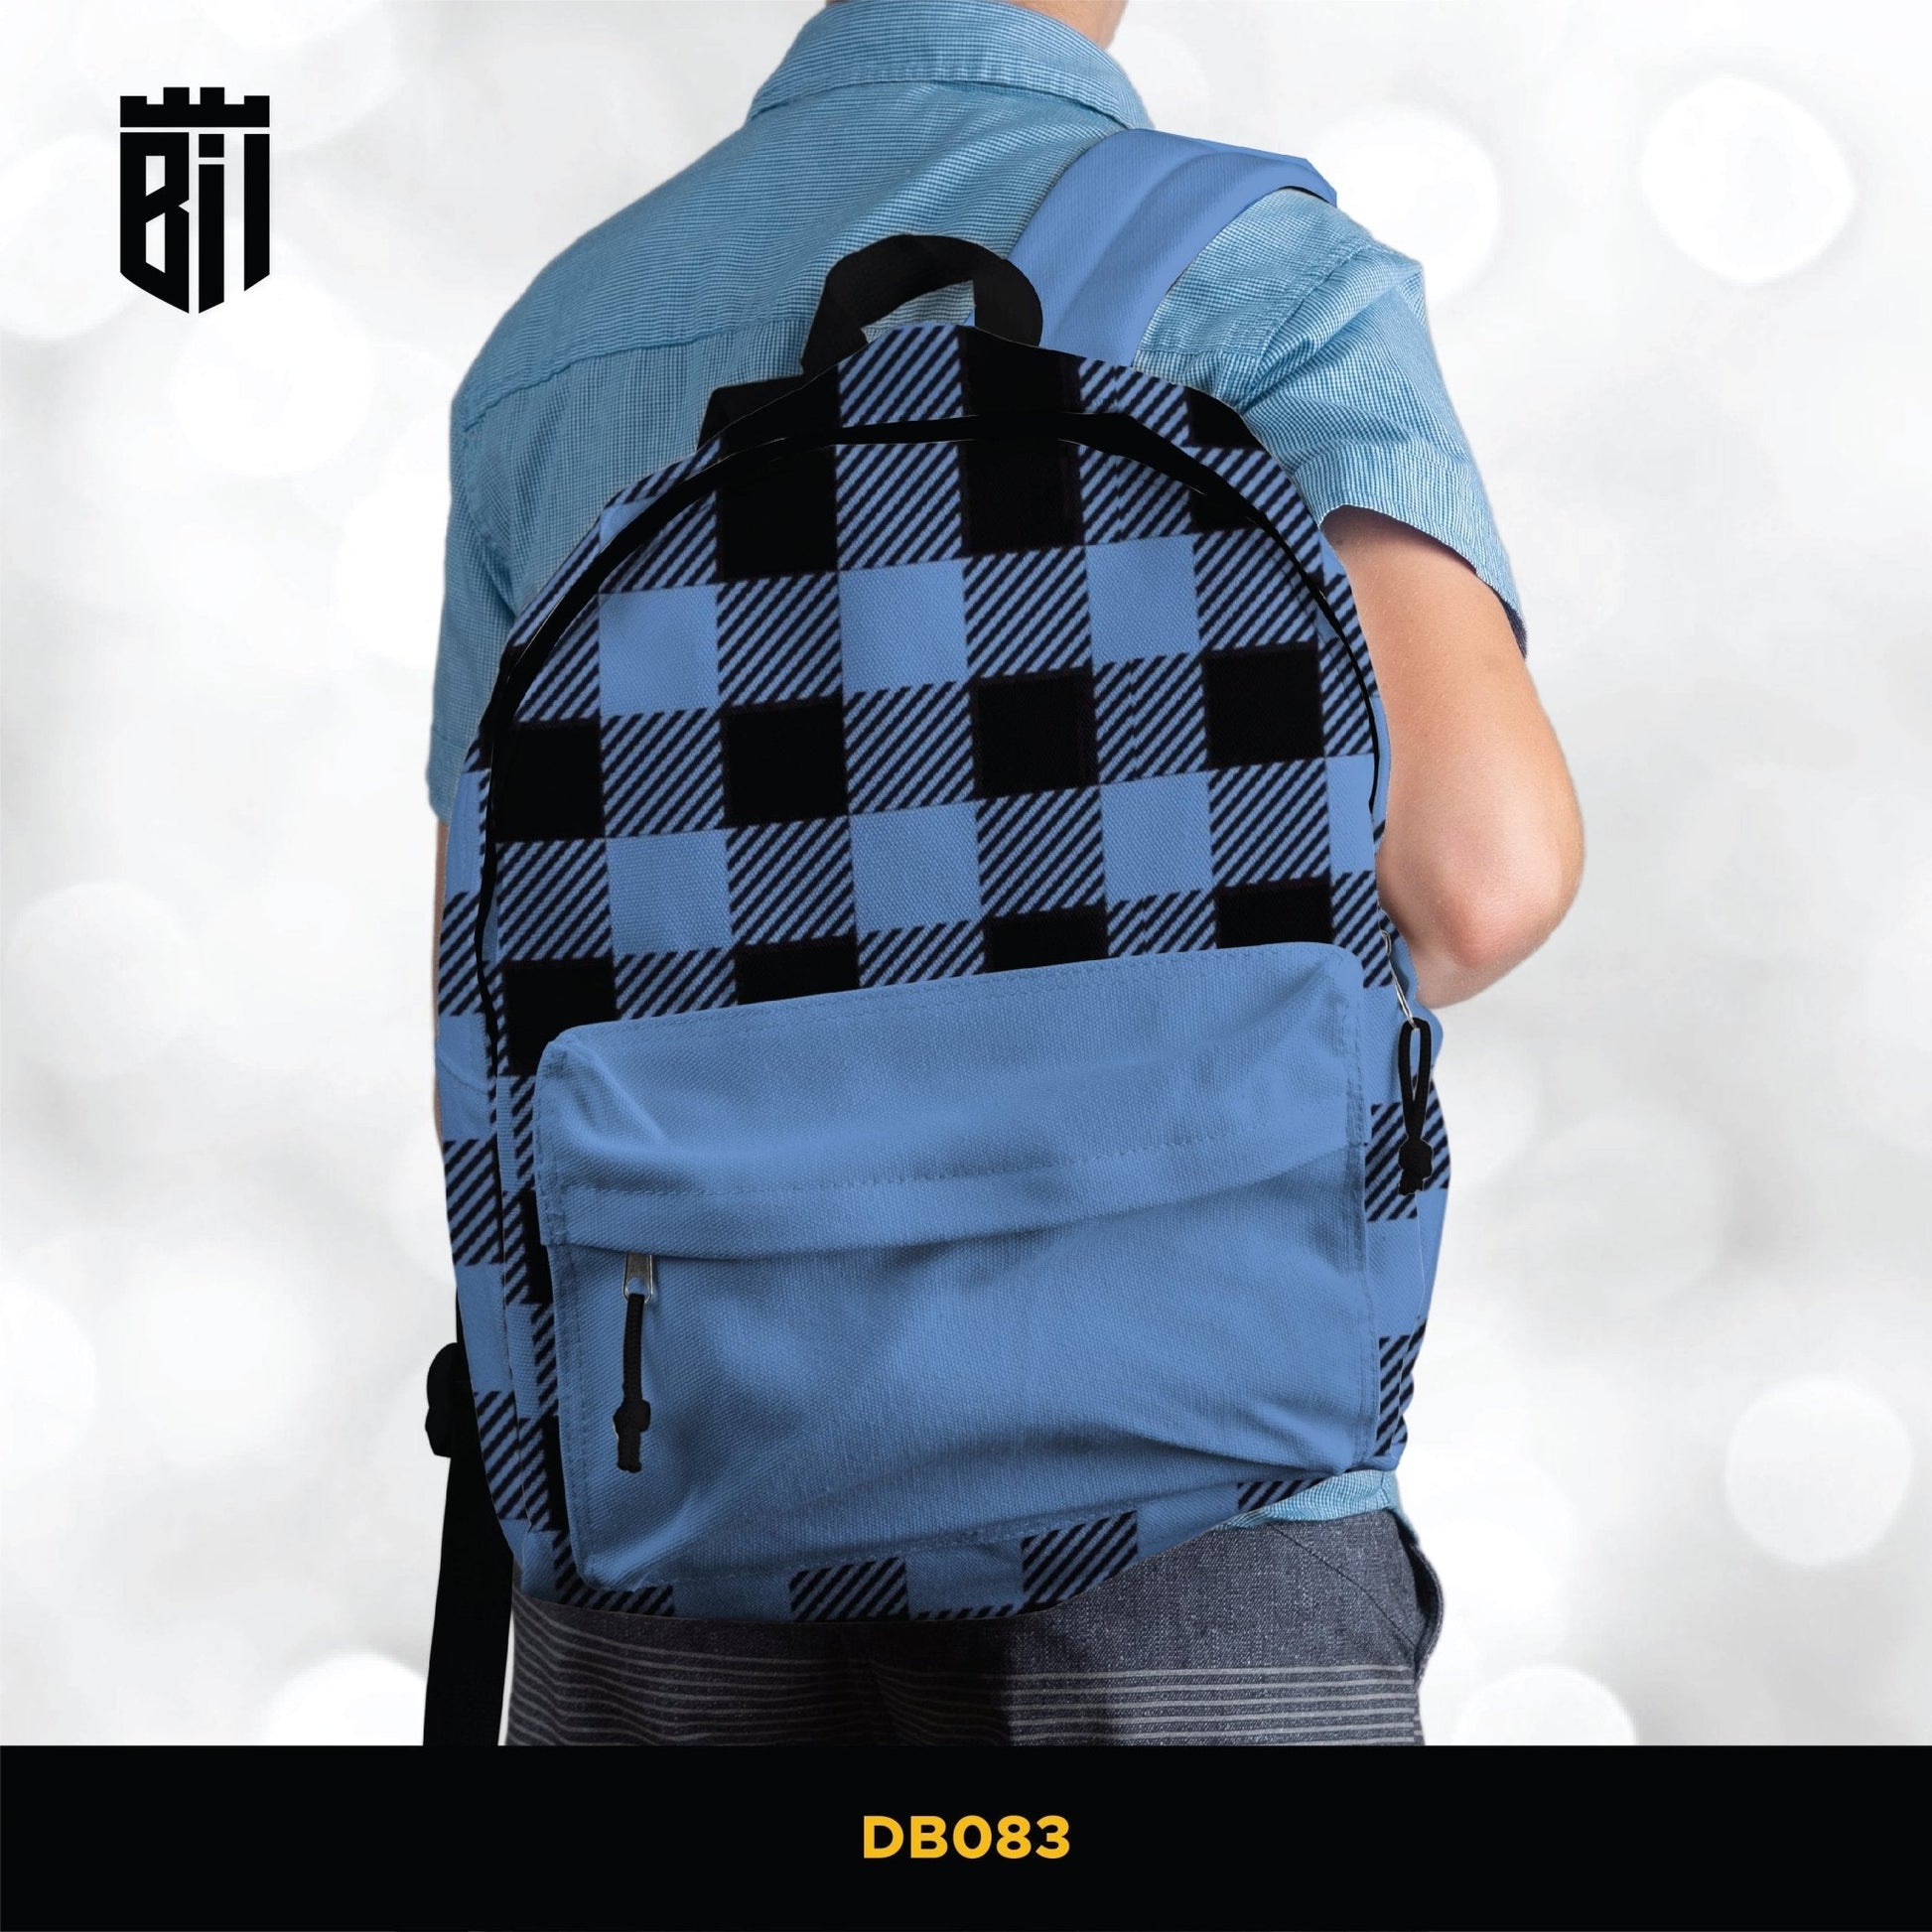 DB083 Blue Checkered Allover Printed Backpack - BREACHIT